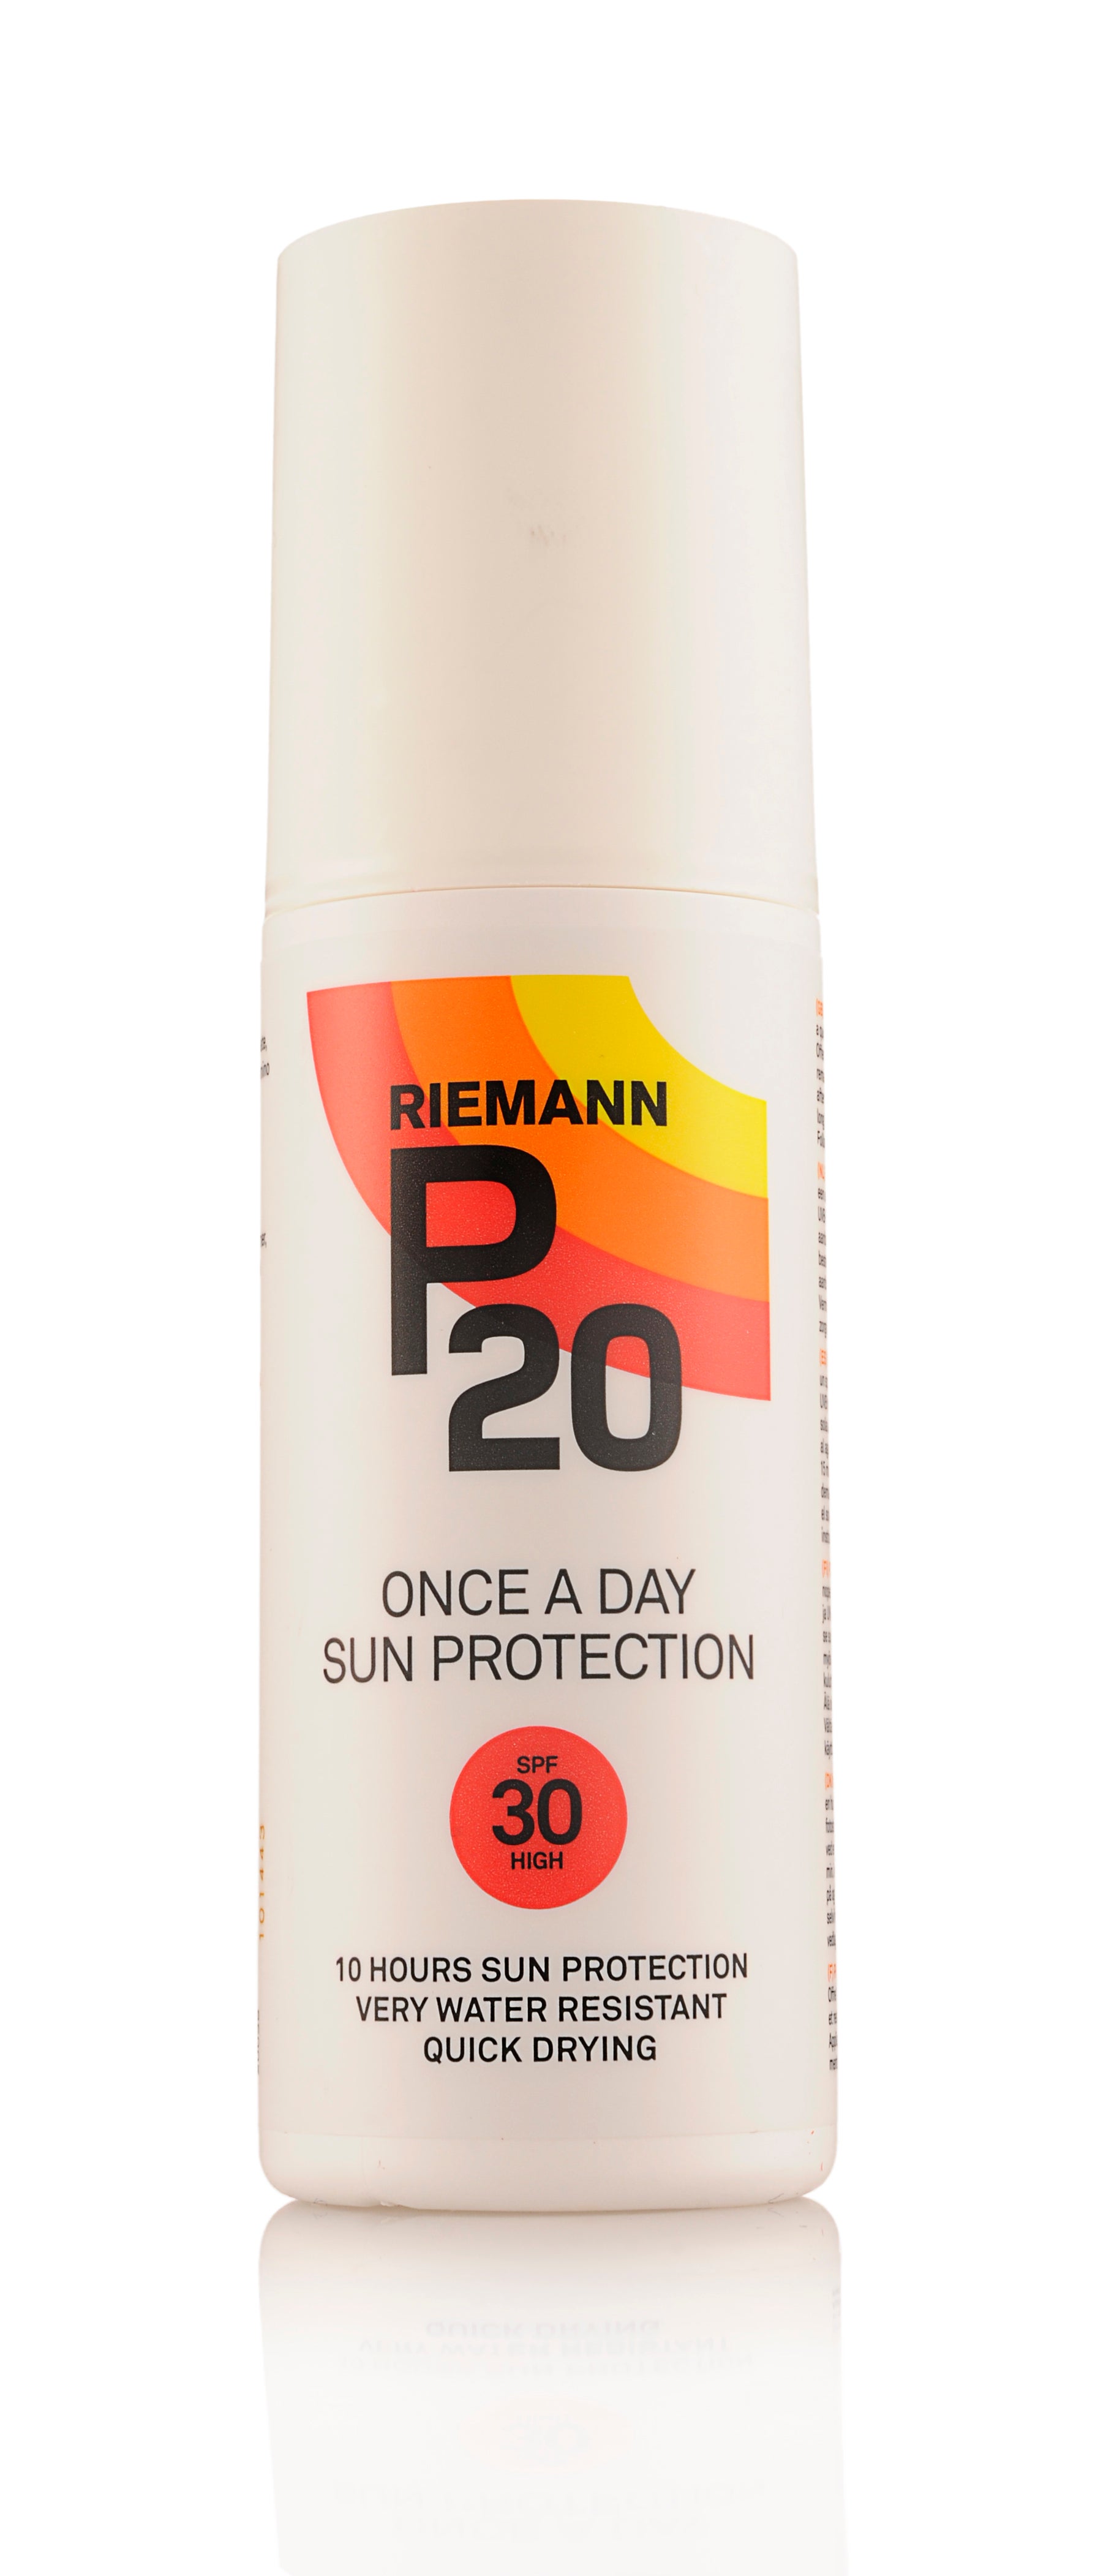 Once a Day Sun Protection SPF 30, £13.29, Riemann P20, boots.com